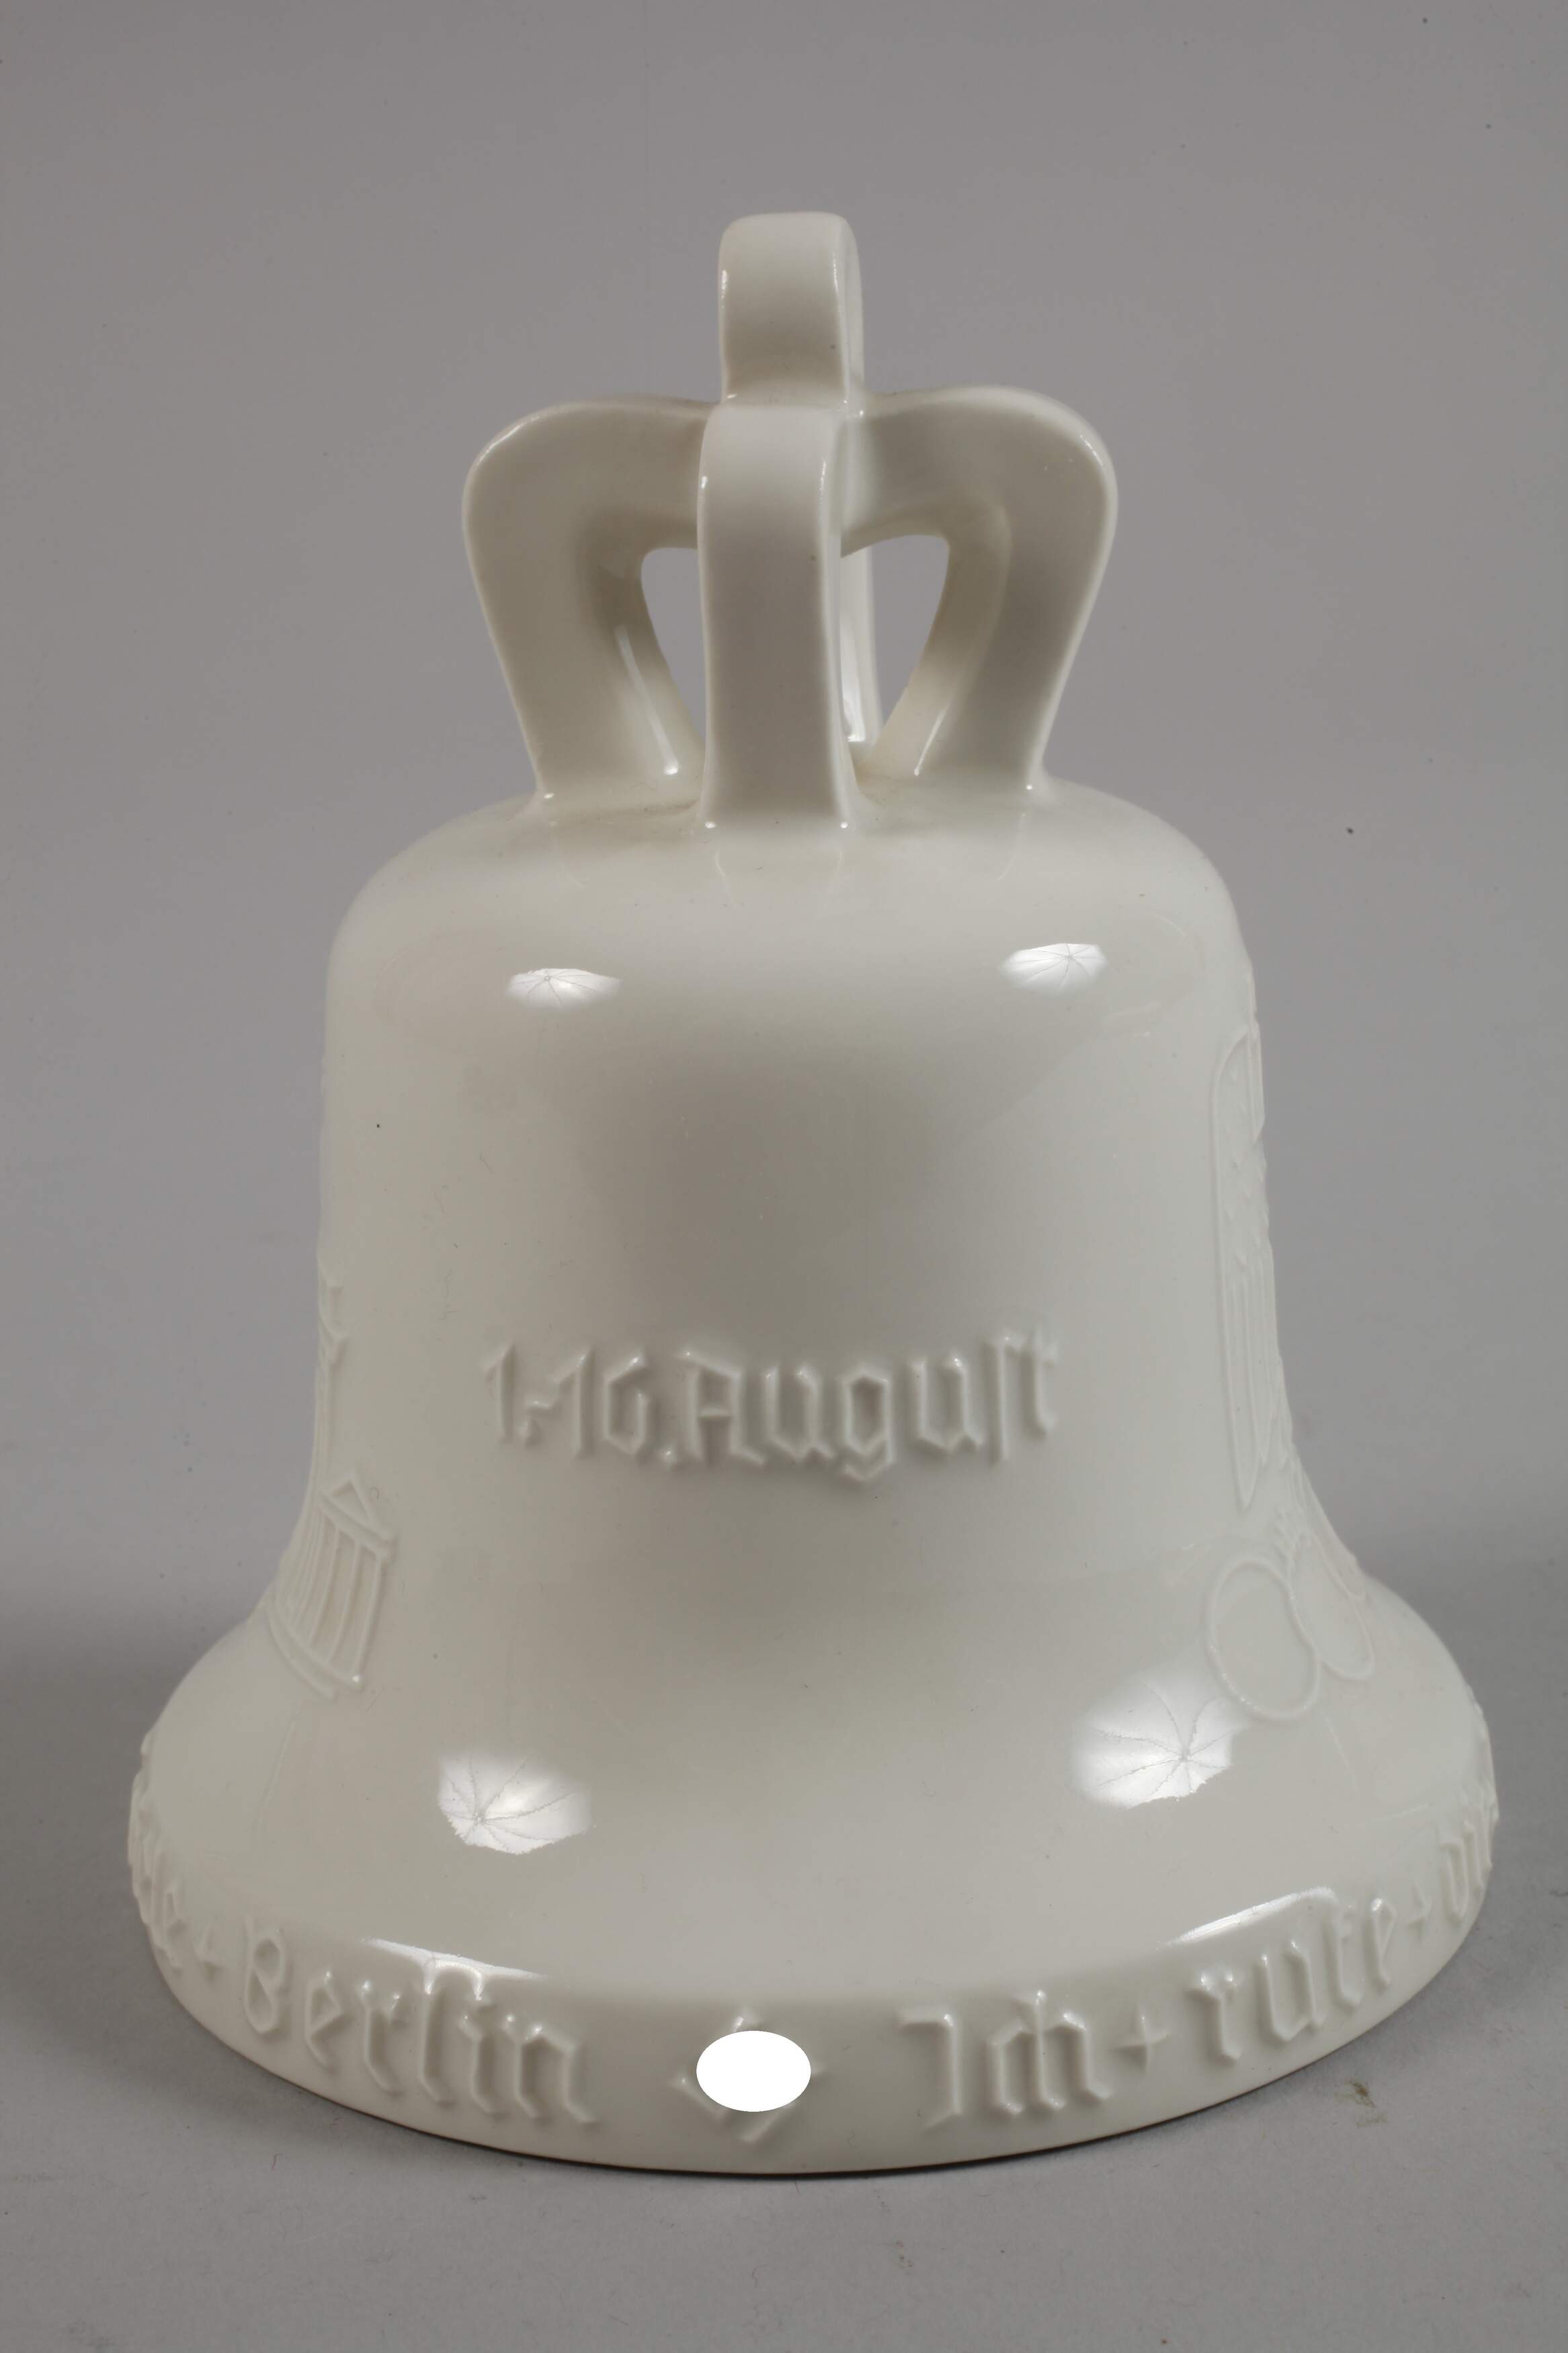 Porcelain bell Olympia 1936 with stand - Image 4 of 6